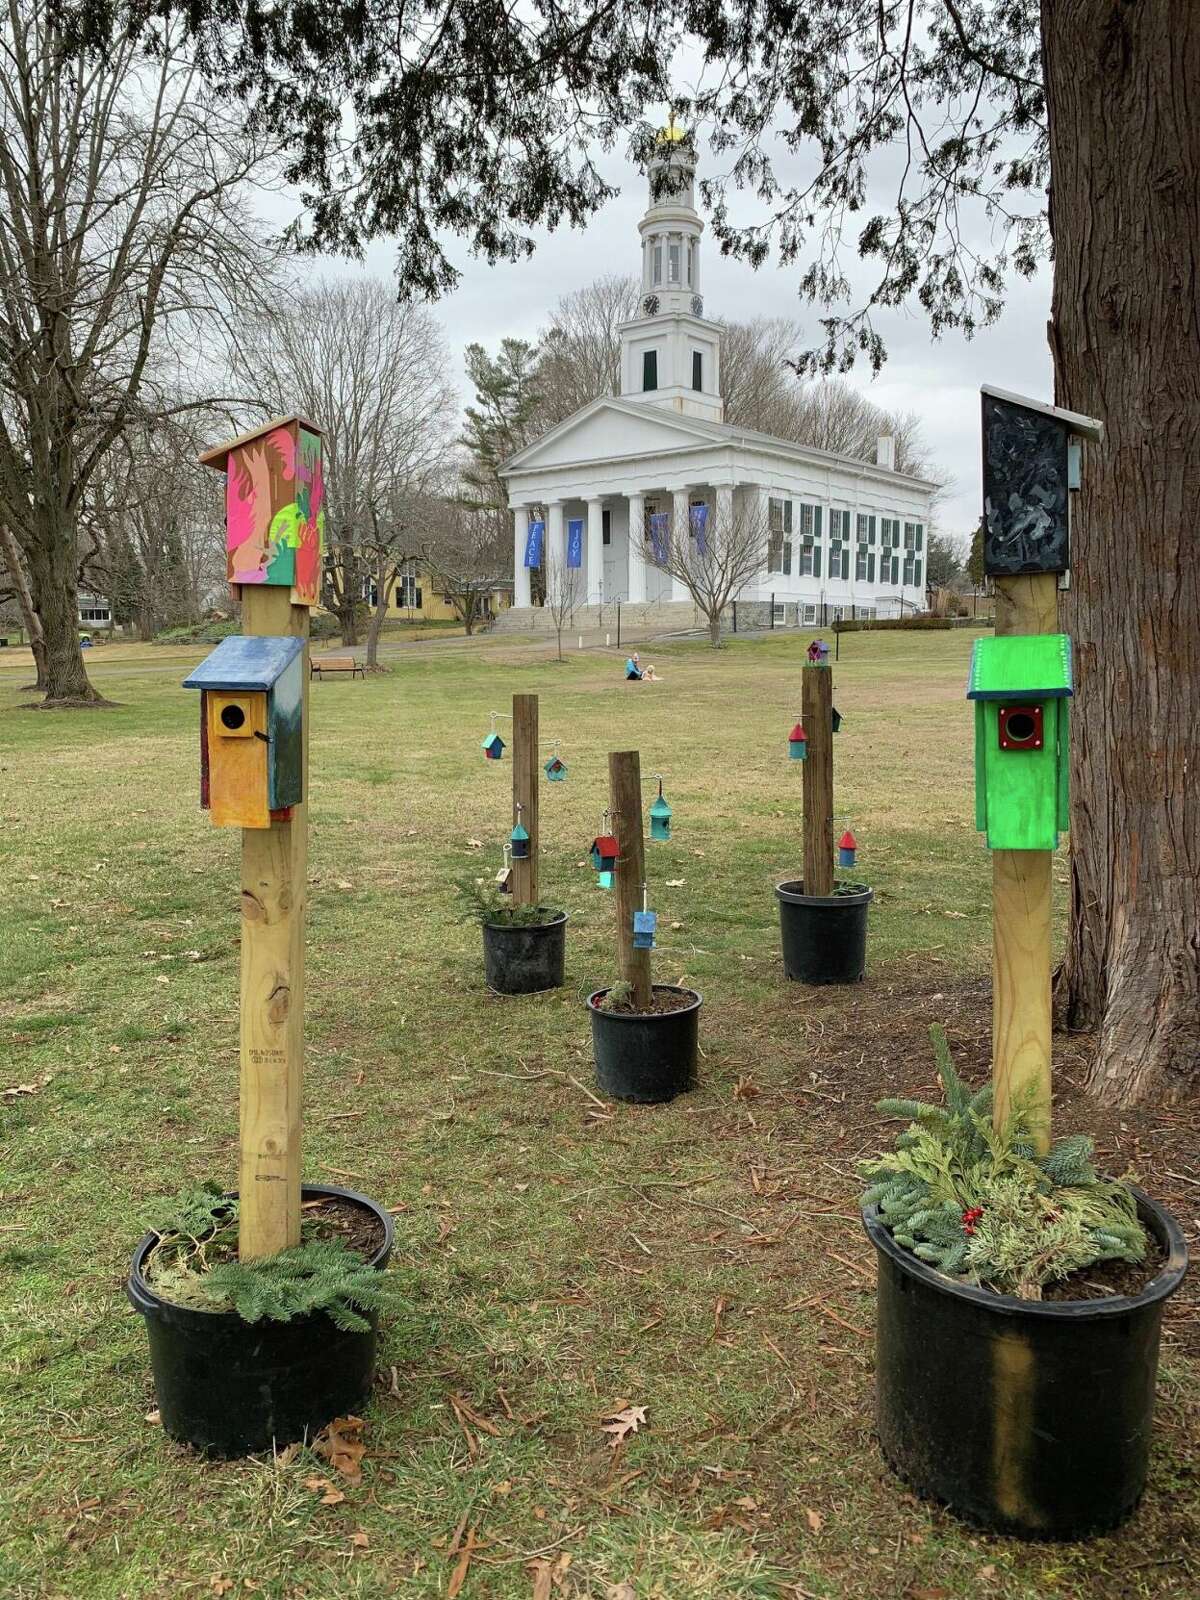 A garden of Heart Houses on the front lawn of the First Congregational Church in Madison.